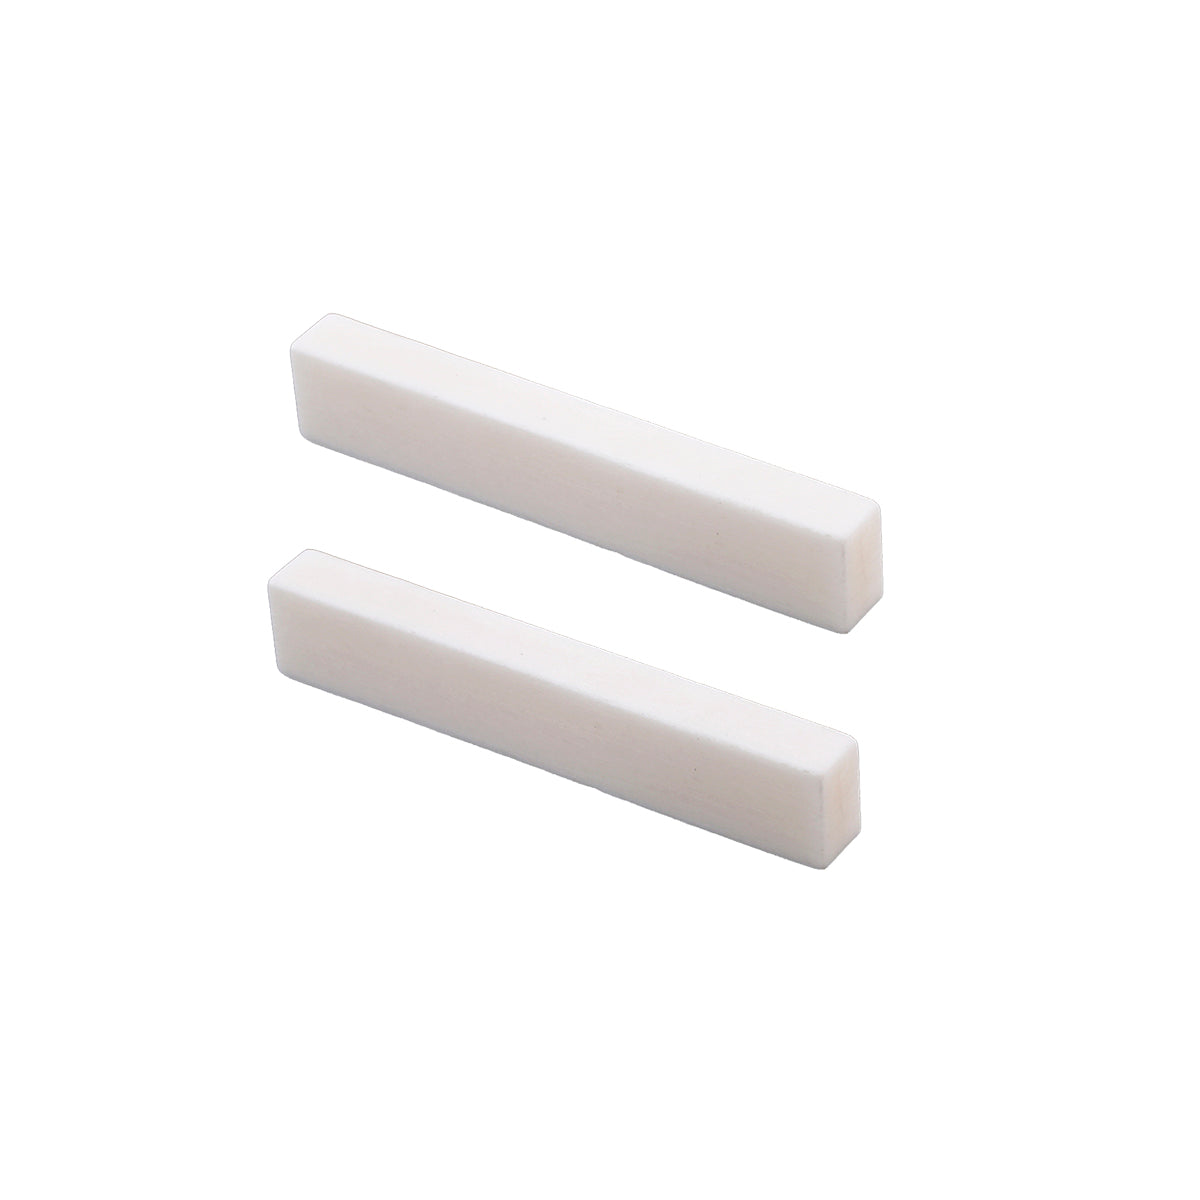 Musiclily Bone Guitar Nut or Saddle Blank, 55x6x10mm (2 Pieces)